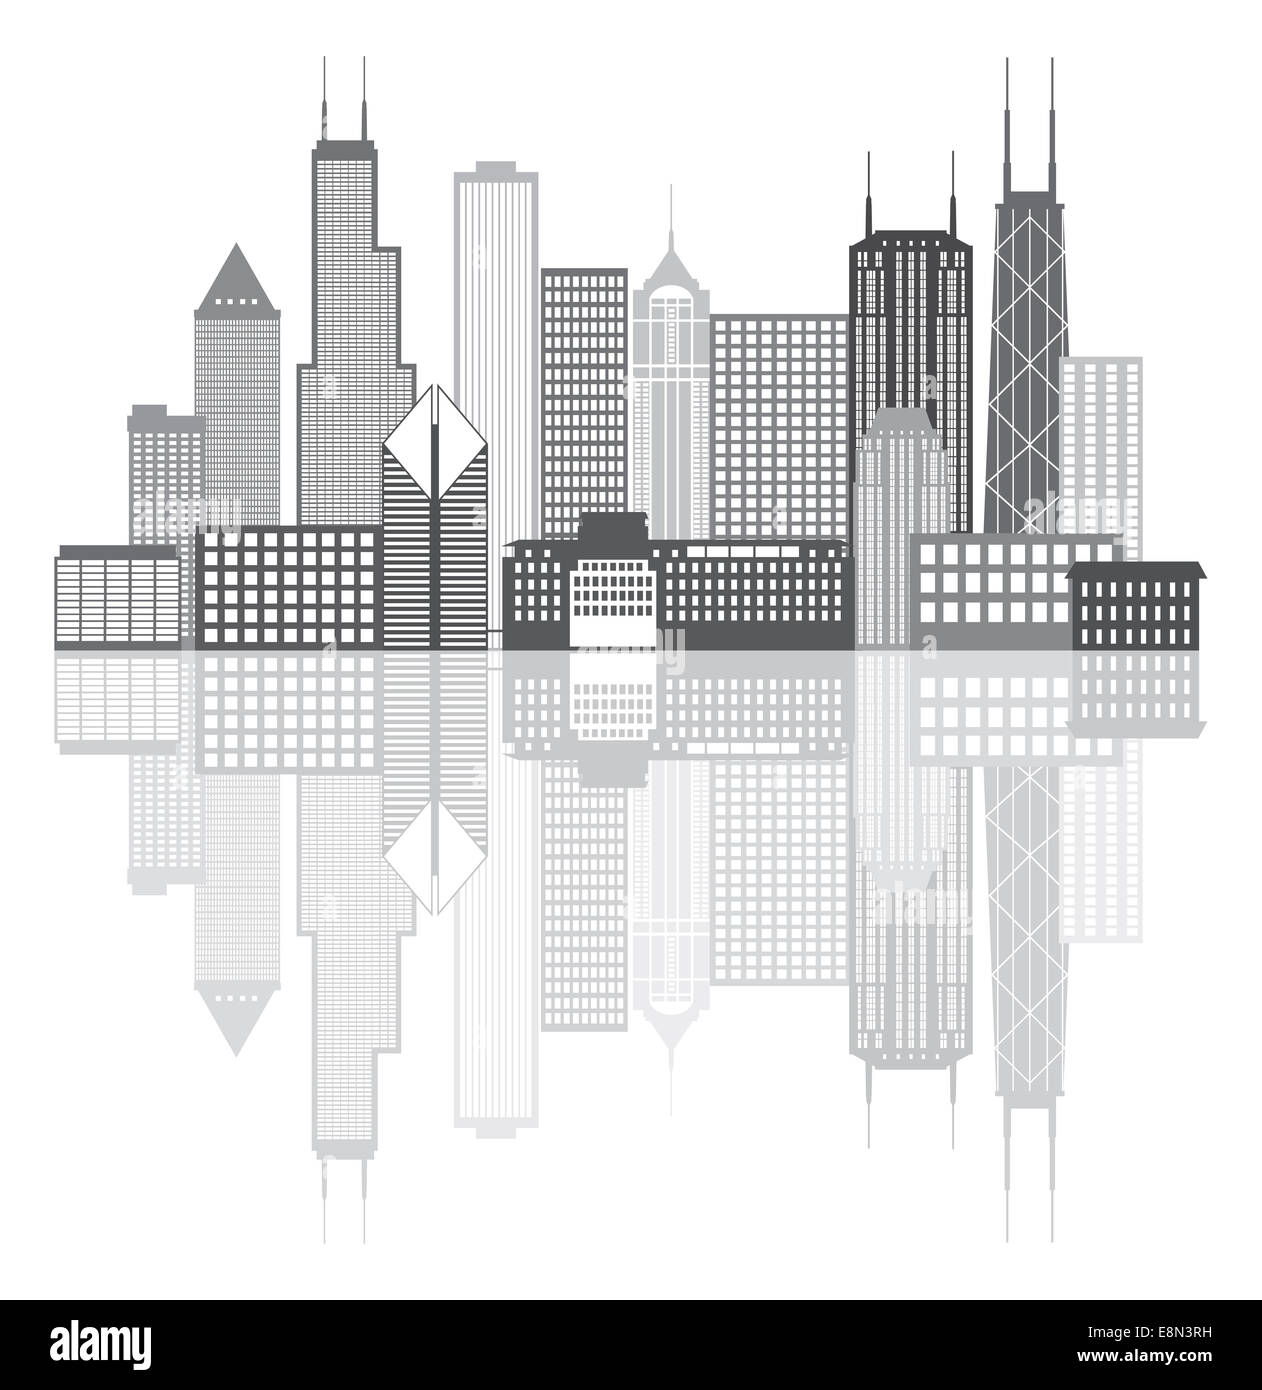 Chicago Illinois City Skyline Panorama Grayscale Outline Silhouette with Reflection Isolated on White Background Illustration Stock Photo